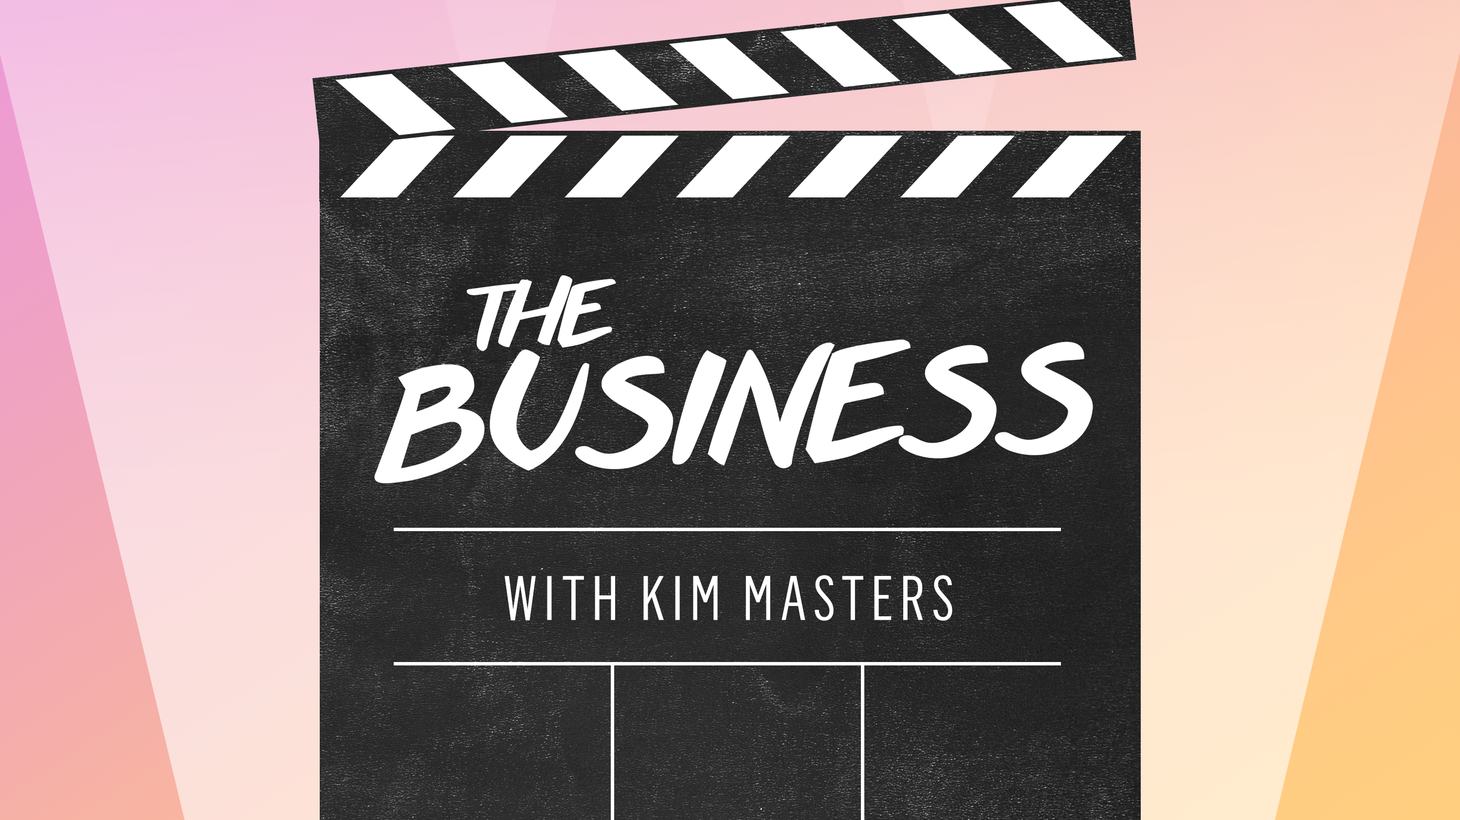 This week on The Business, a Hollywood lawyer predicts a rough road ahead for what used to be a recession-proof business. Plus, video games…go indie!